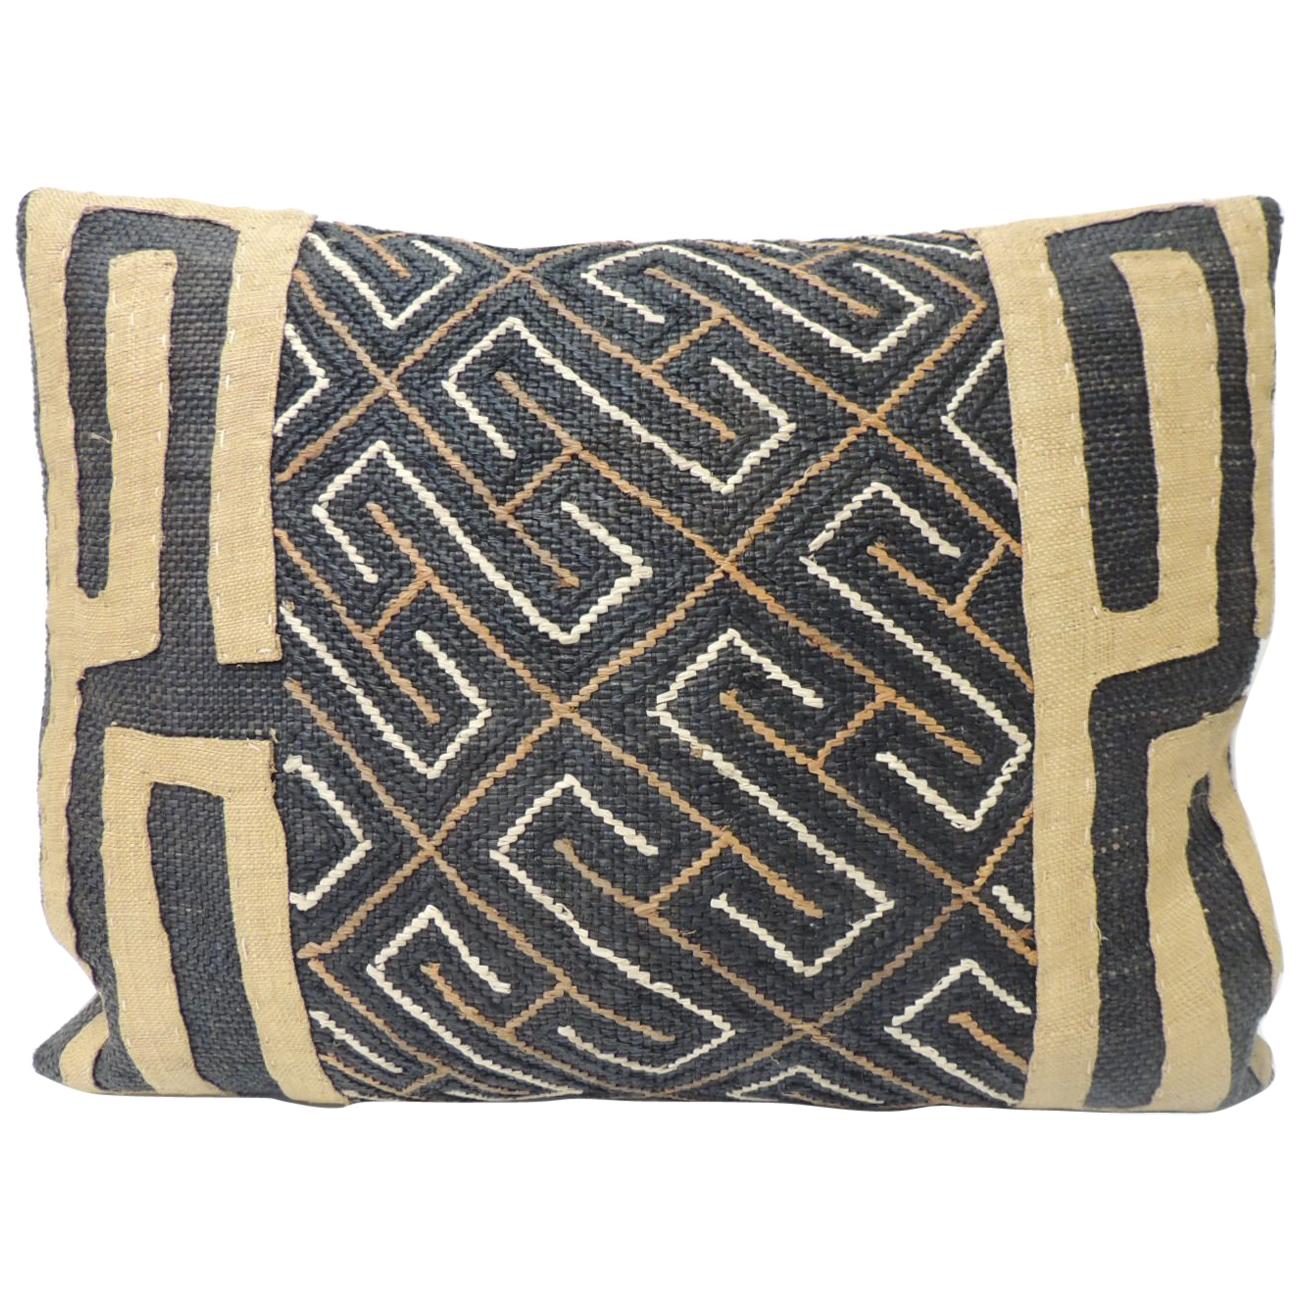 Vintage Yellow and Black African Kuba Embroidered Decorative Bolster Pillow